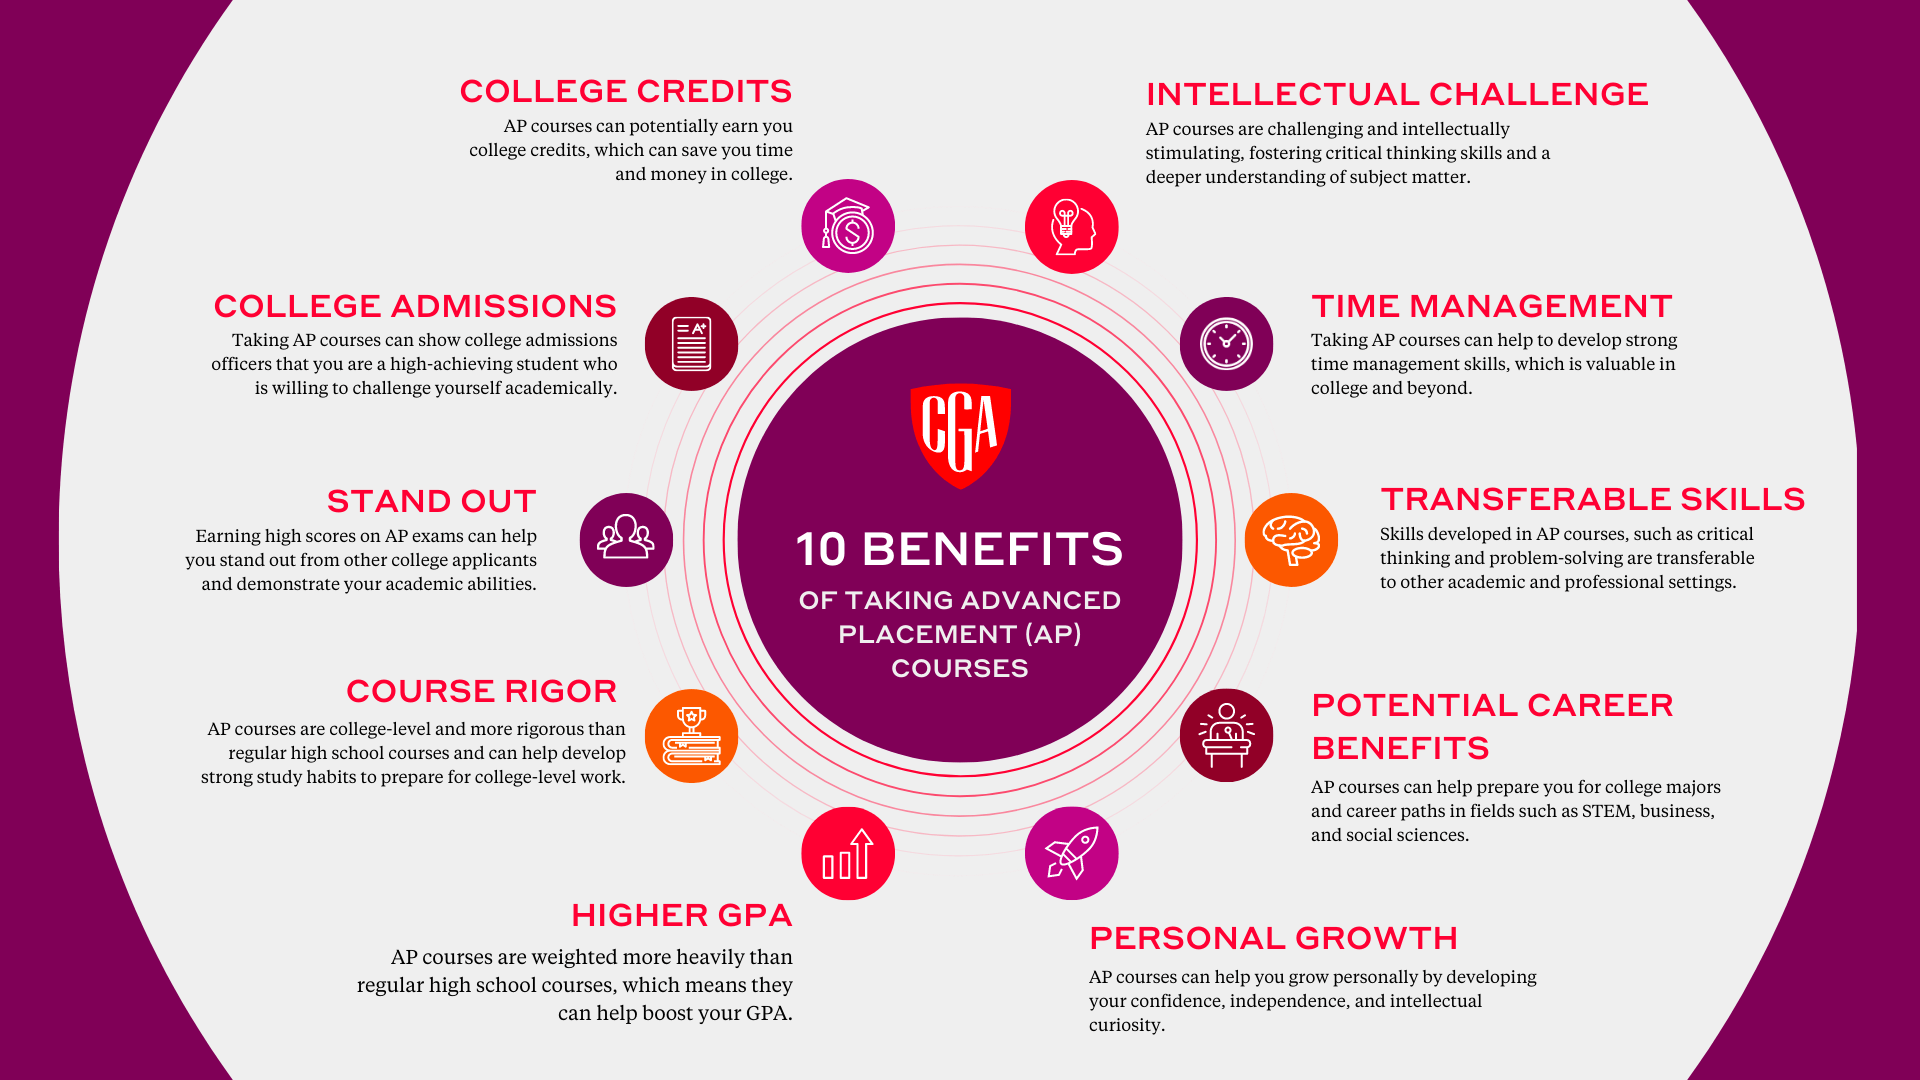 10 Benefits of Taking AP Courses